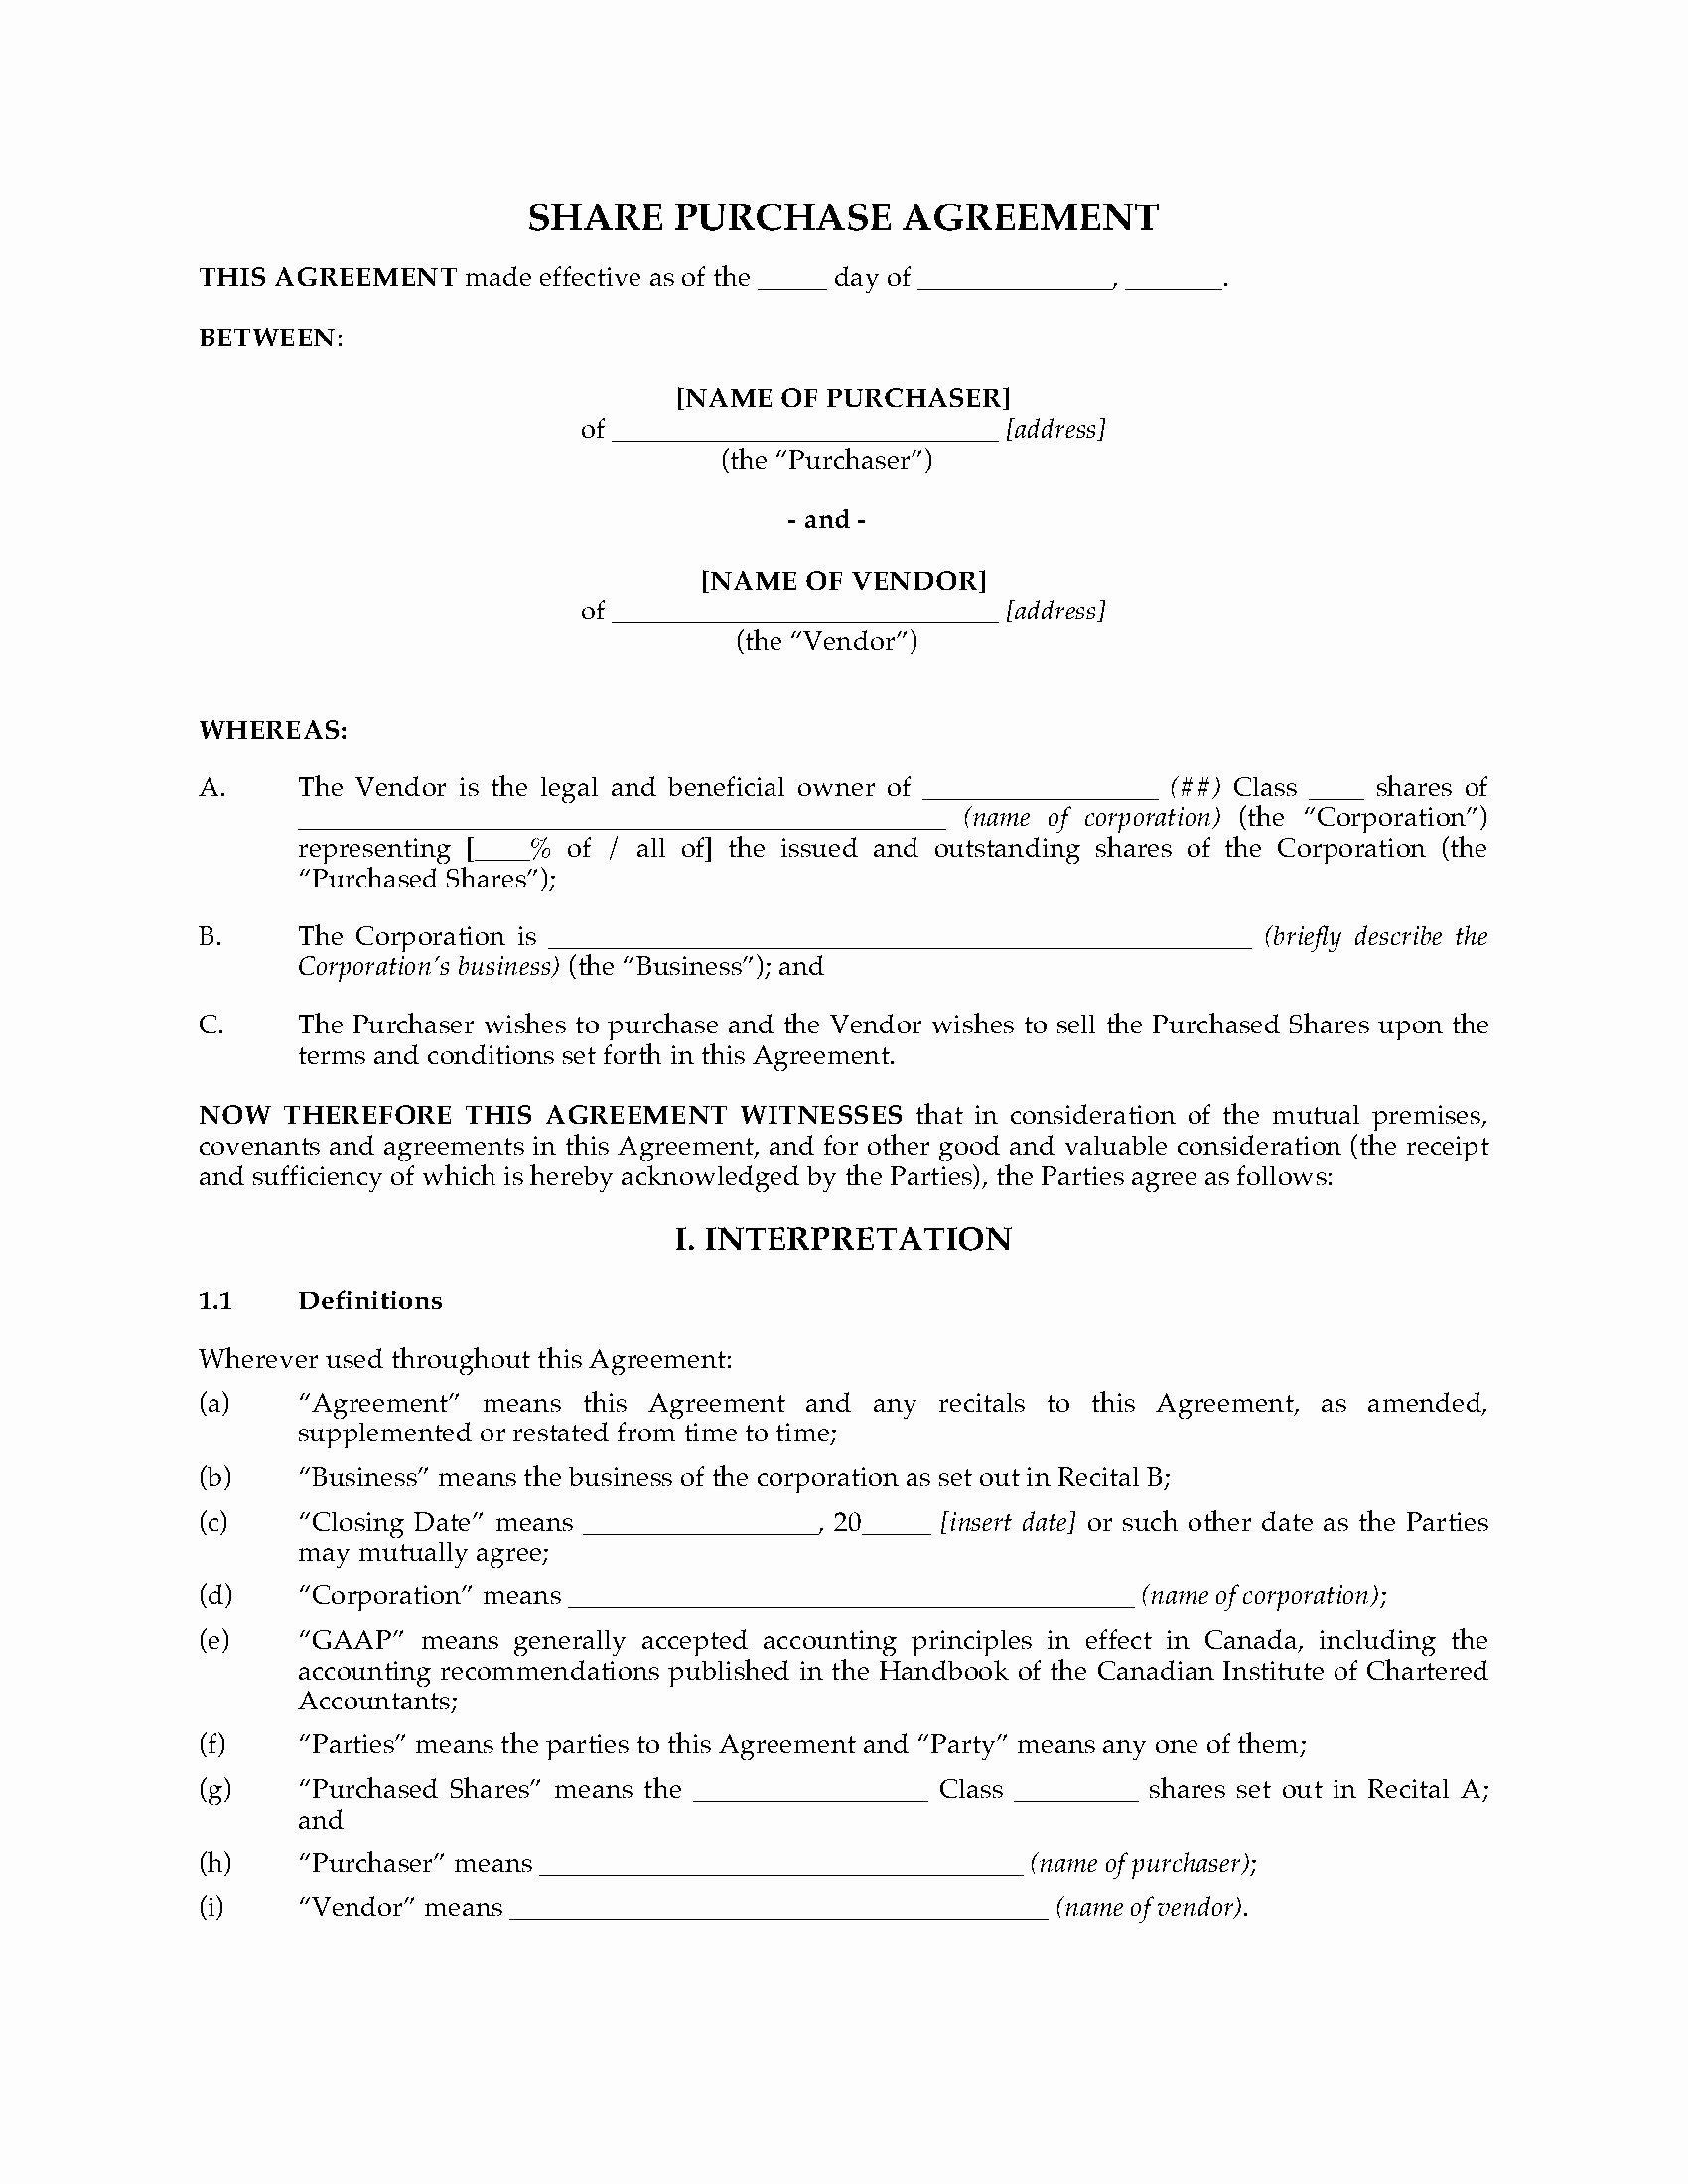 Share Purchase Agreement Template Inspirational British Columbia Purchase Agreement